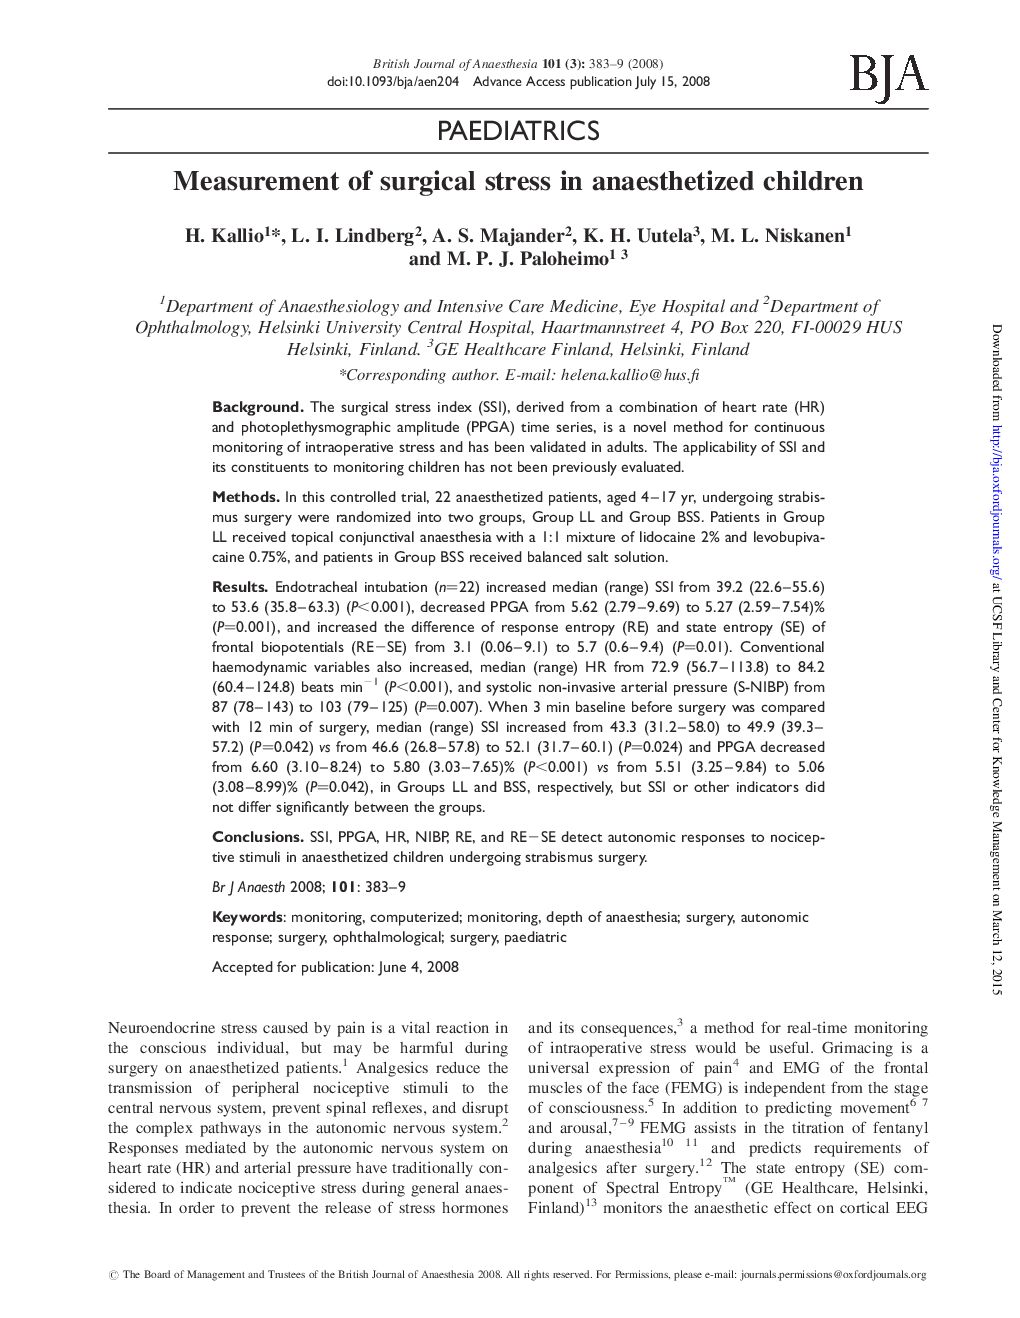 Measurement of surgical stress in anaesthetized children